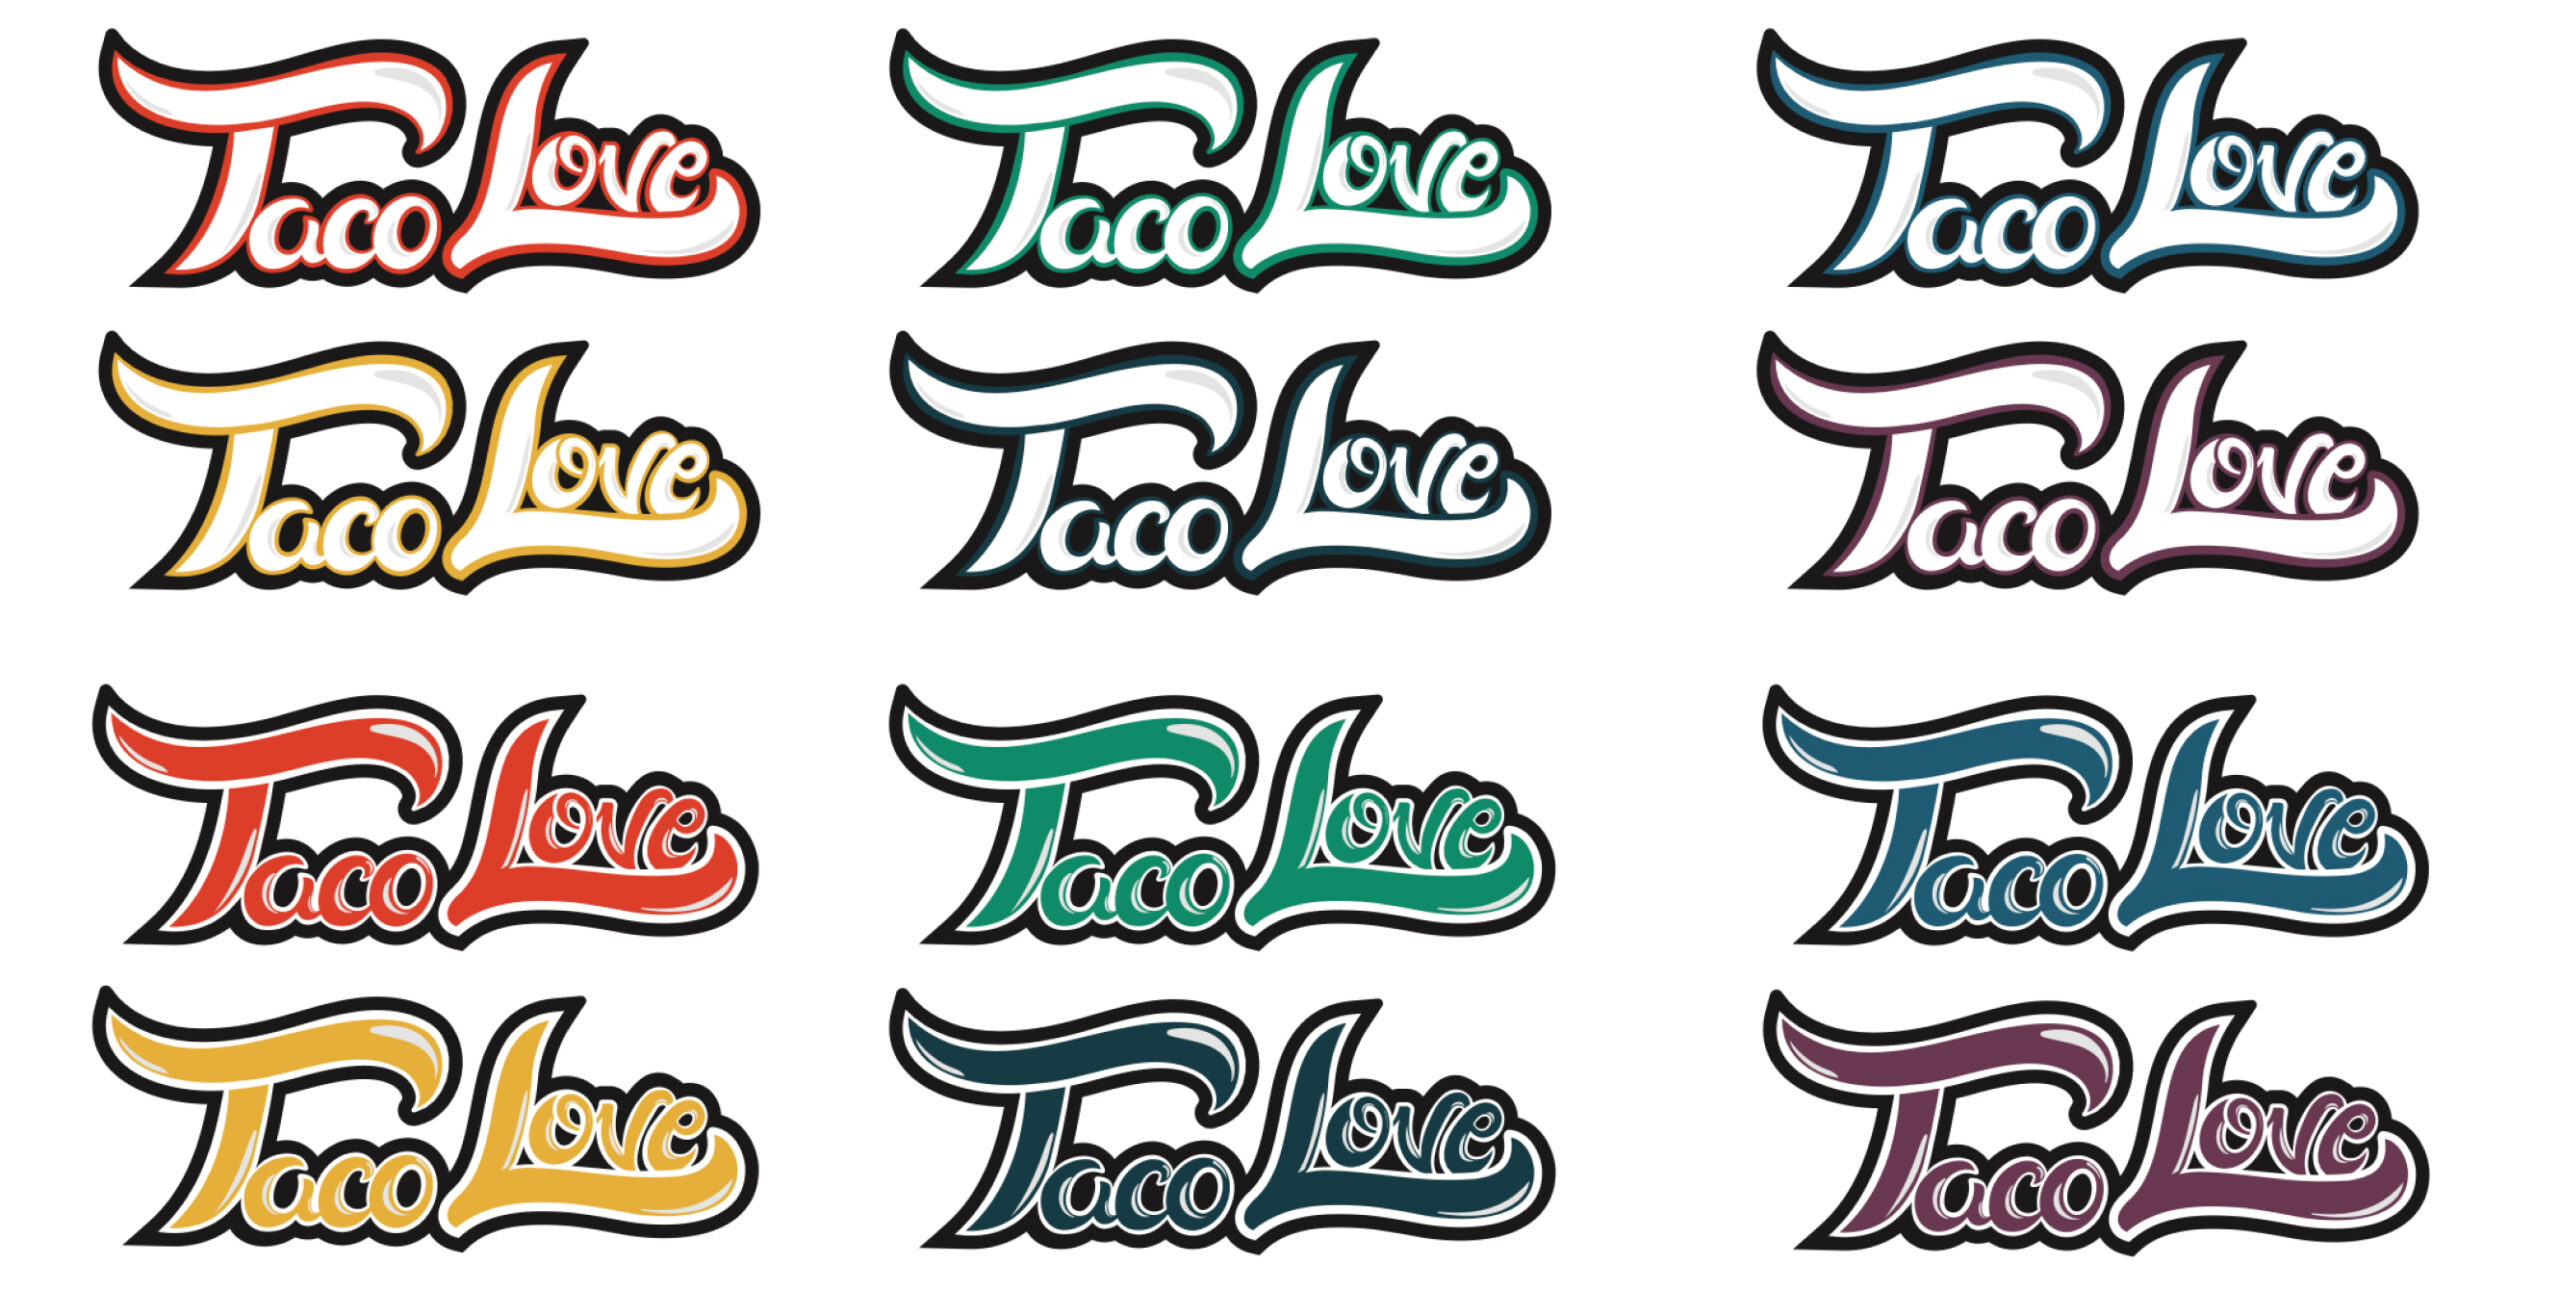 Taco Love Logo and Brand Color